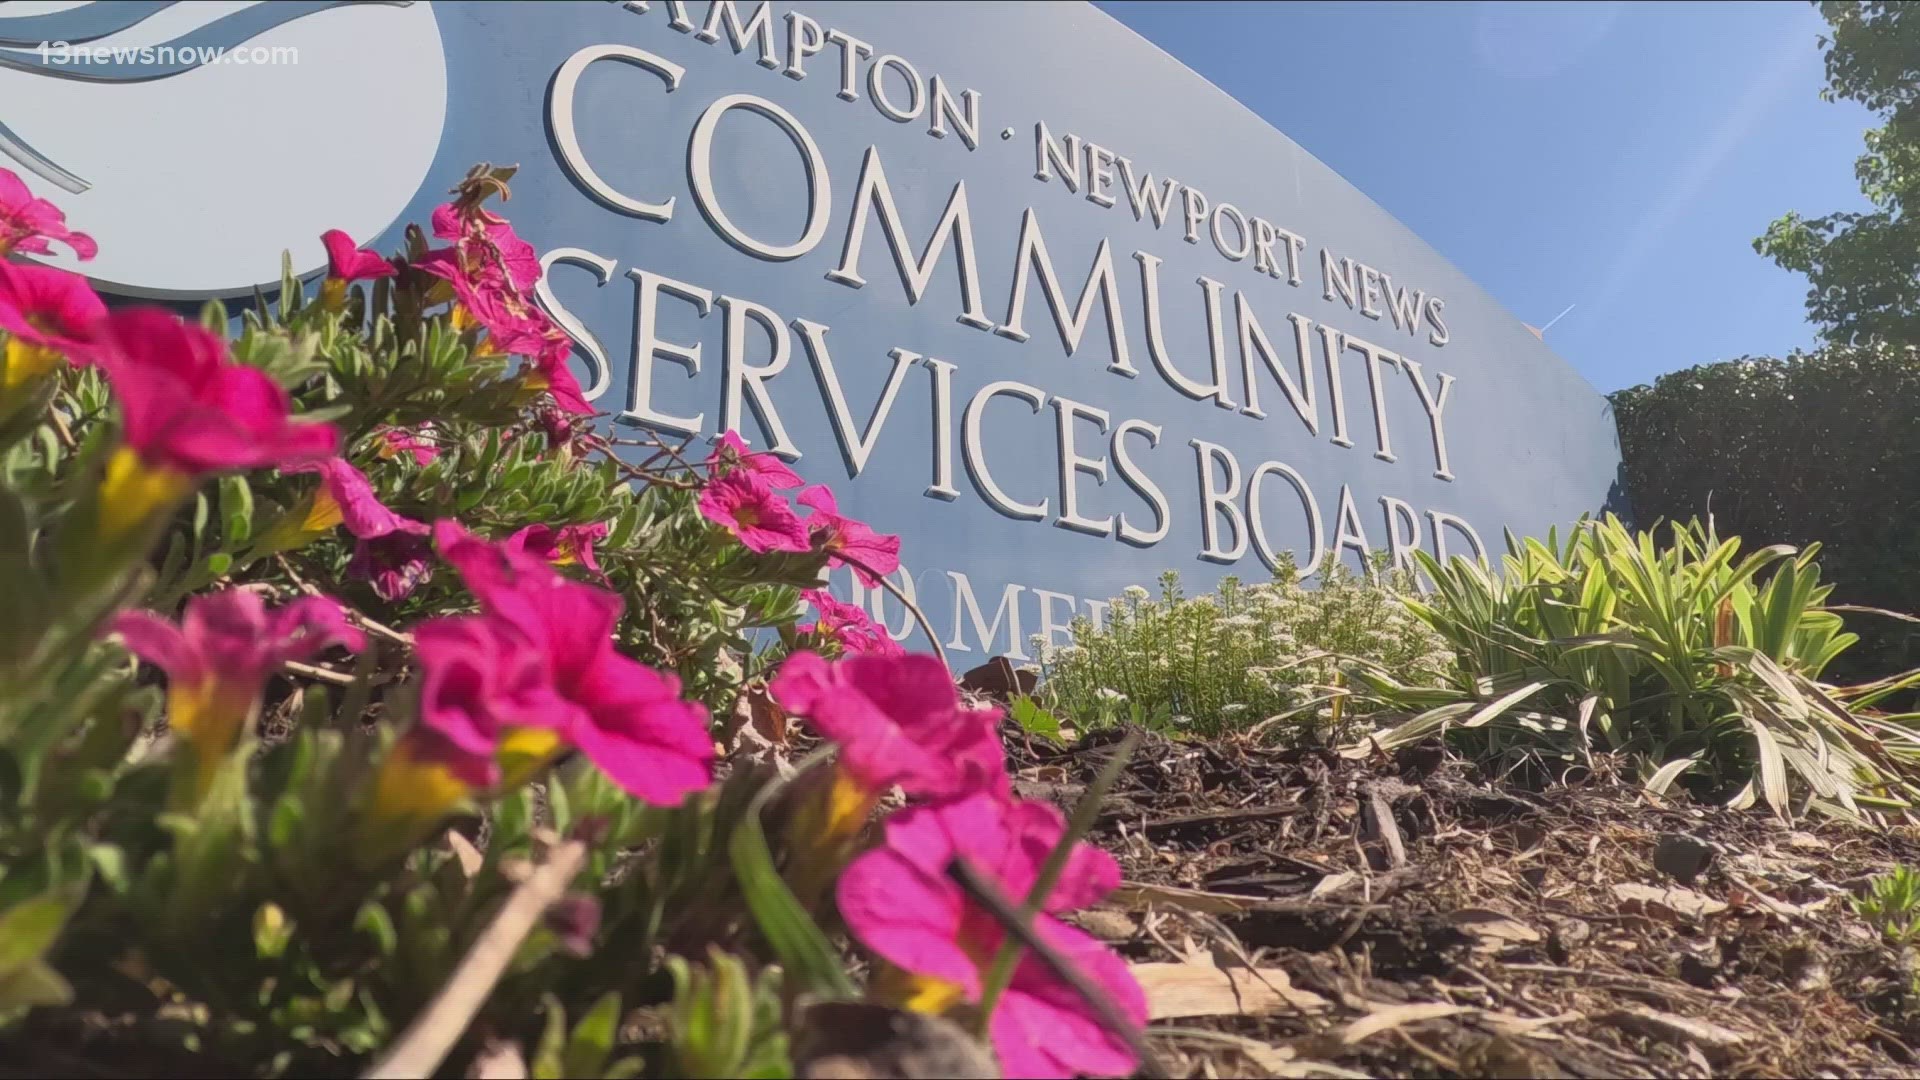 The Hampton-Newport News Community Services Board serves more than 20,000 people every day. Their goal is to reduce the layer of stigma to allow people to get help.